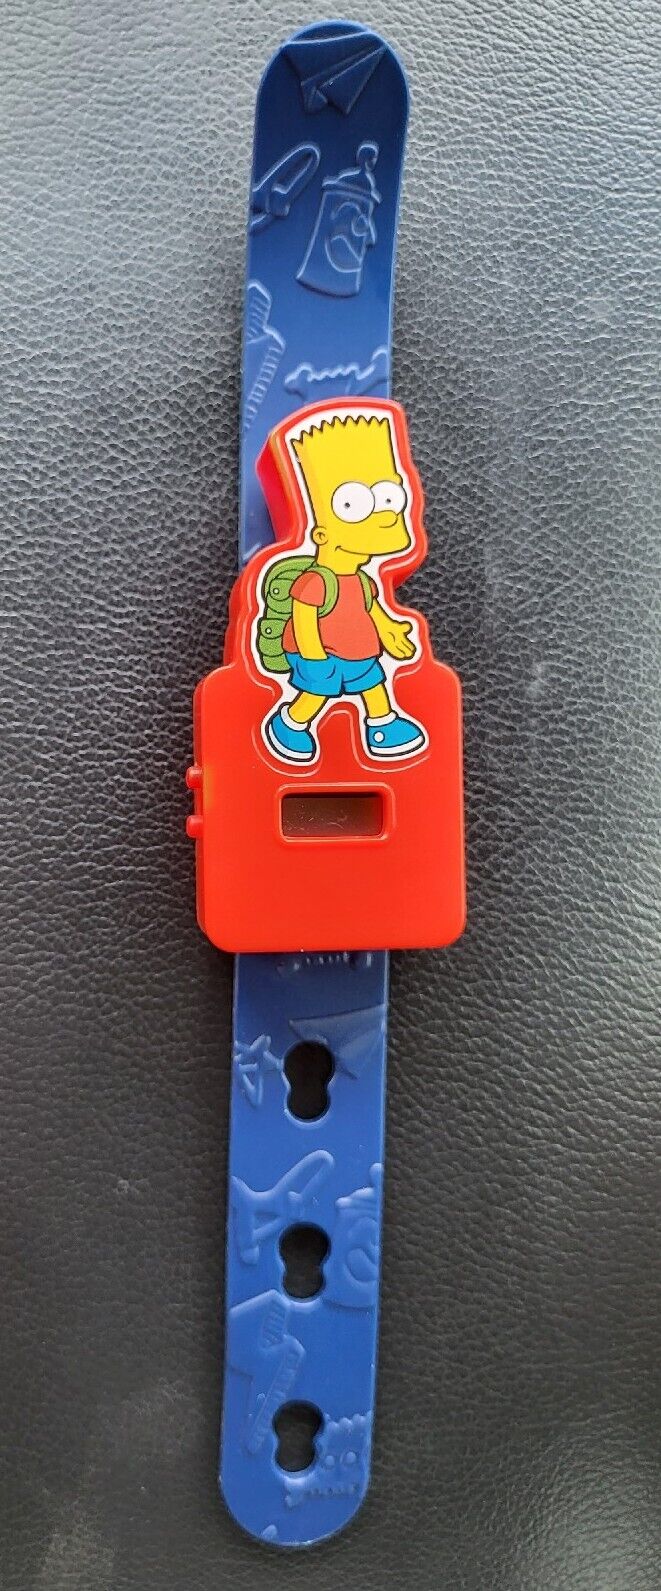 Rare Burger King Bart Simpson Watch 2015 The Simpsons, untested.